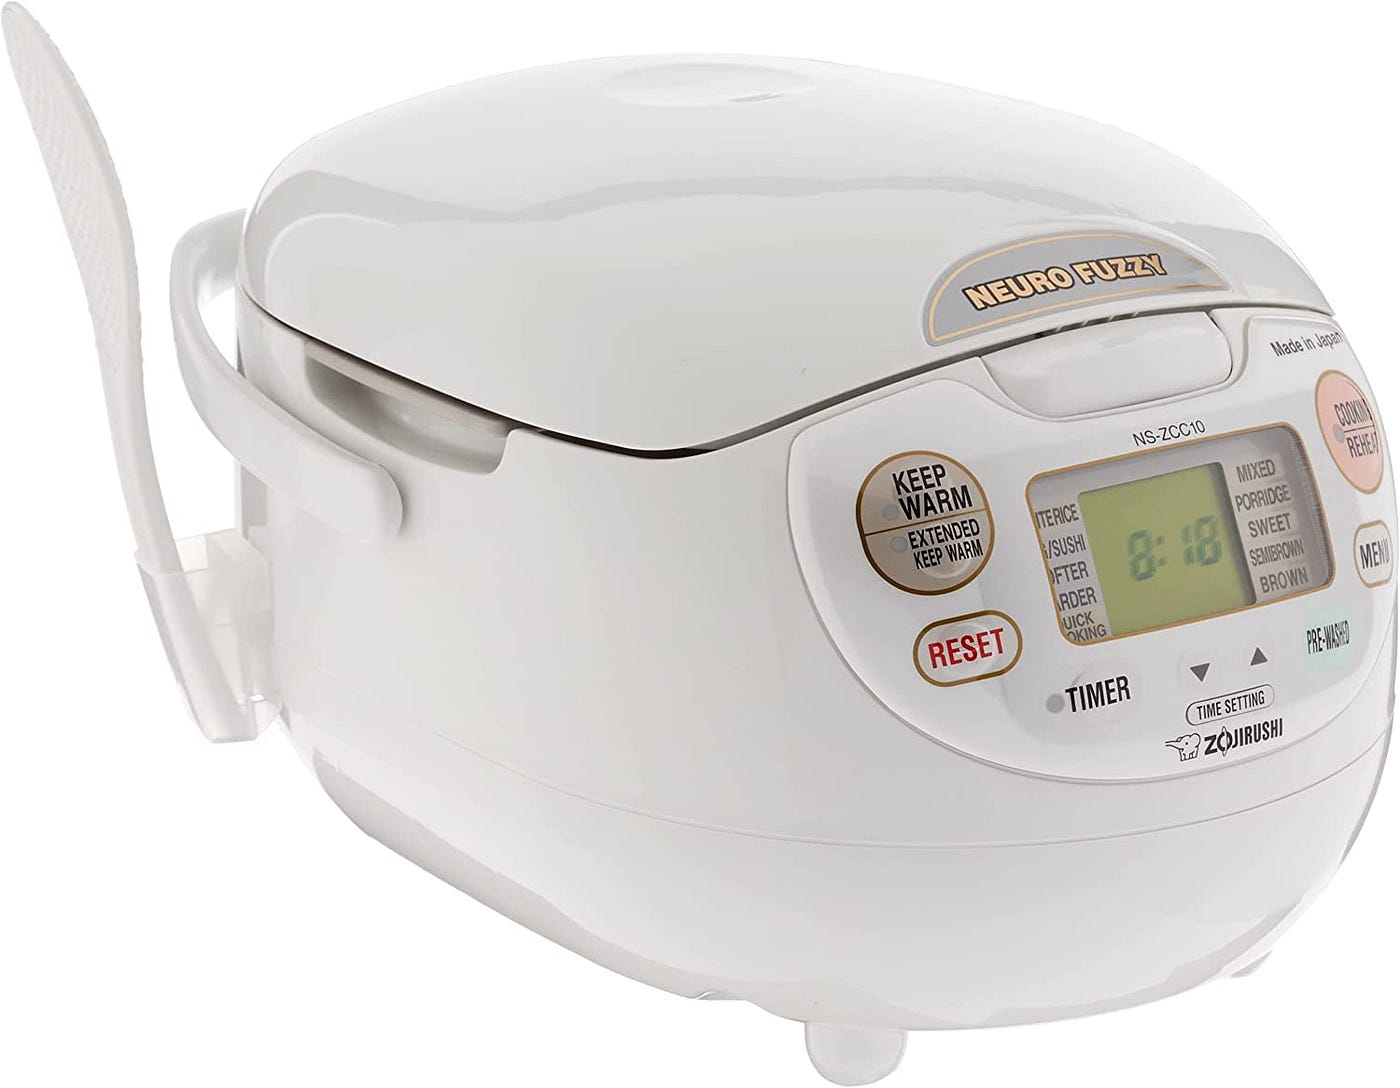 The Secret Staple: Japan's Love for Rice Cookers, by zenDine